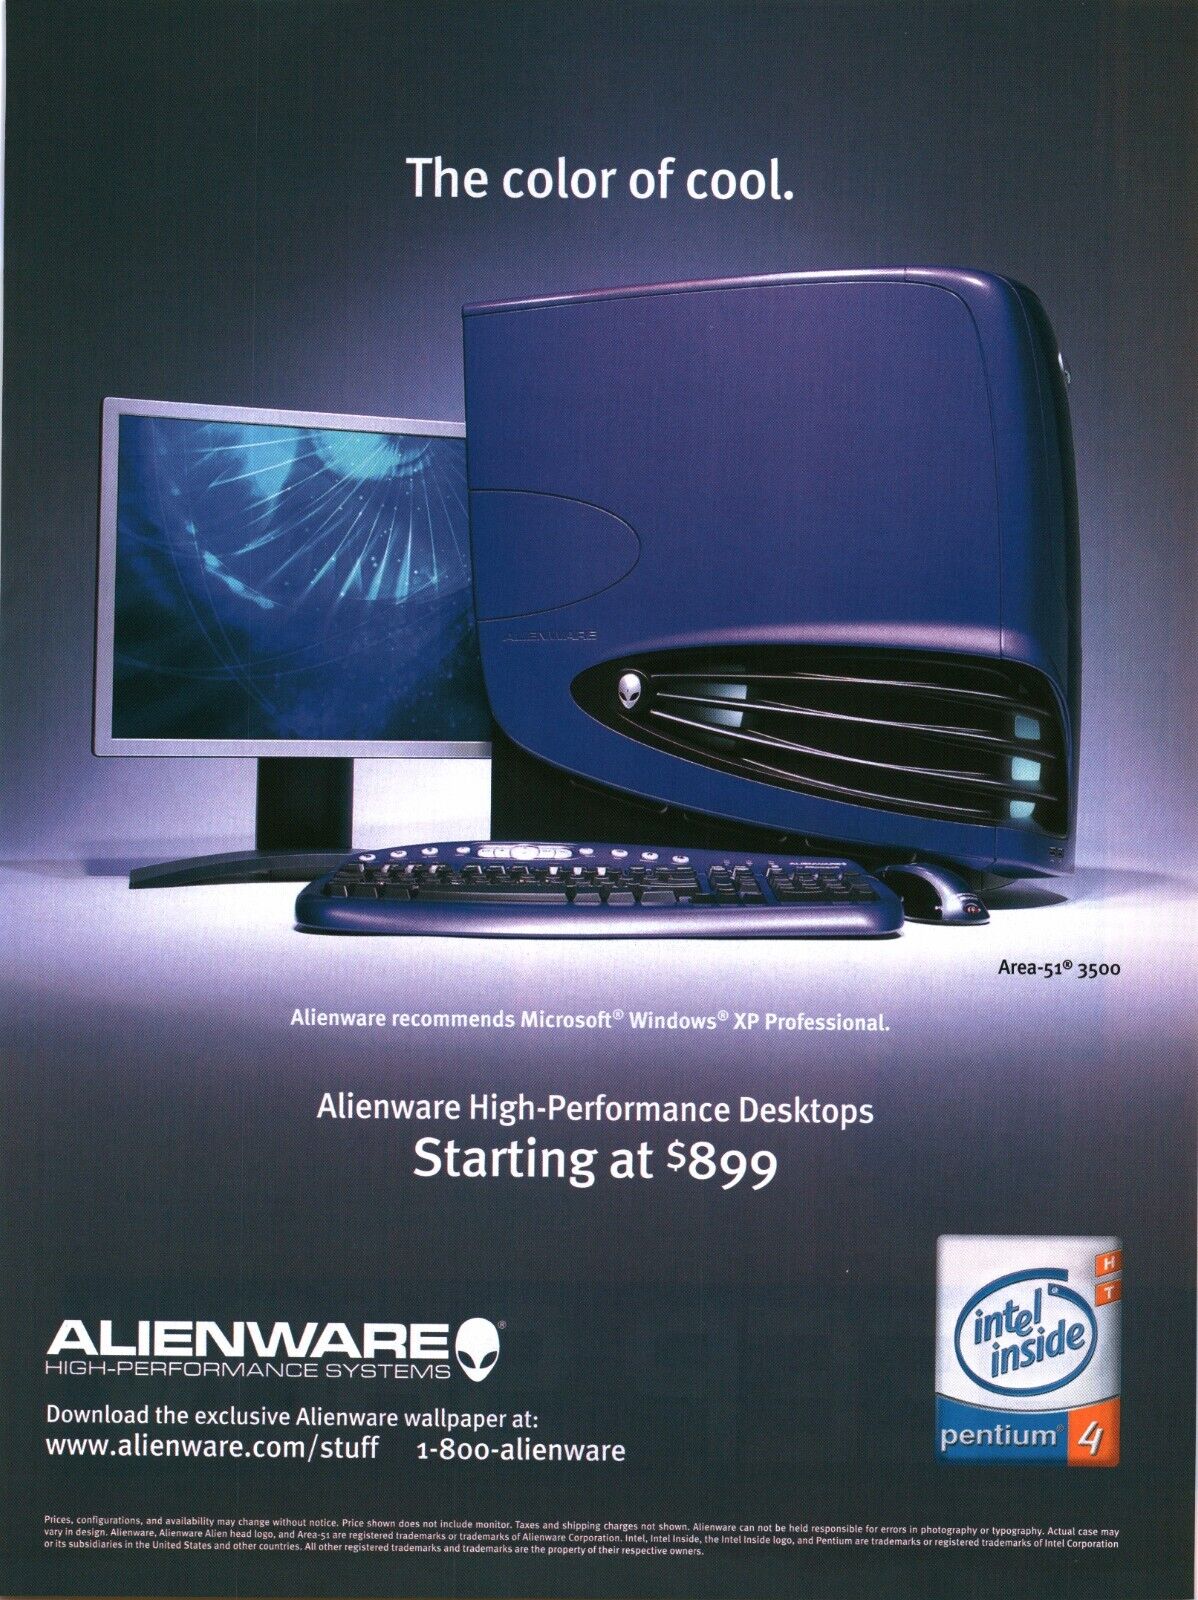 2005 PRINT AD - ALIENWARE HIGH-PERFORMANCE SYSTEMS AD - PURPLE THE COLOR OF COOL